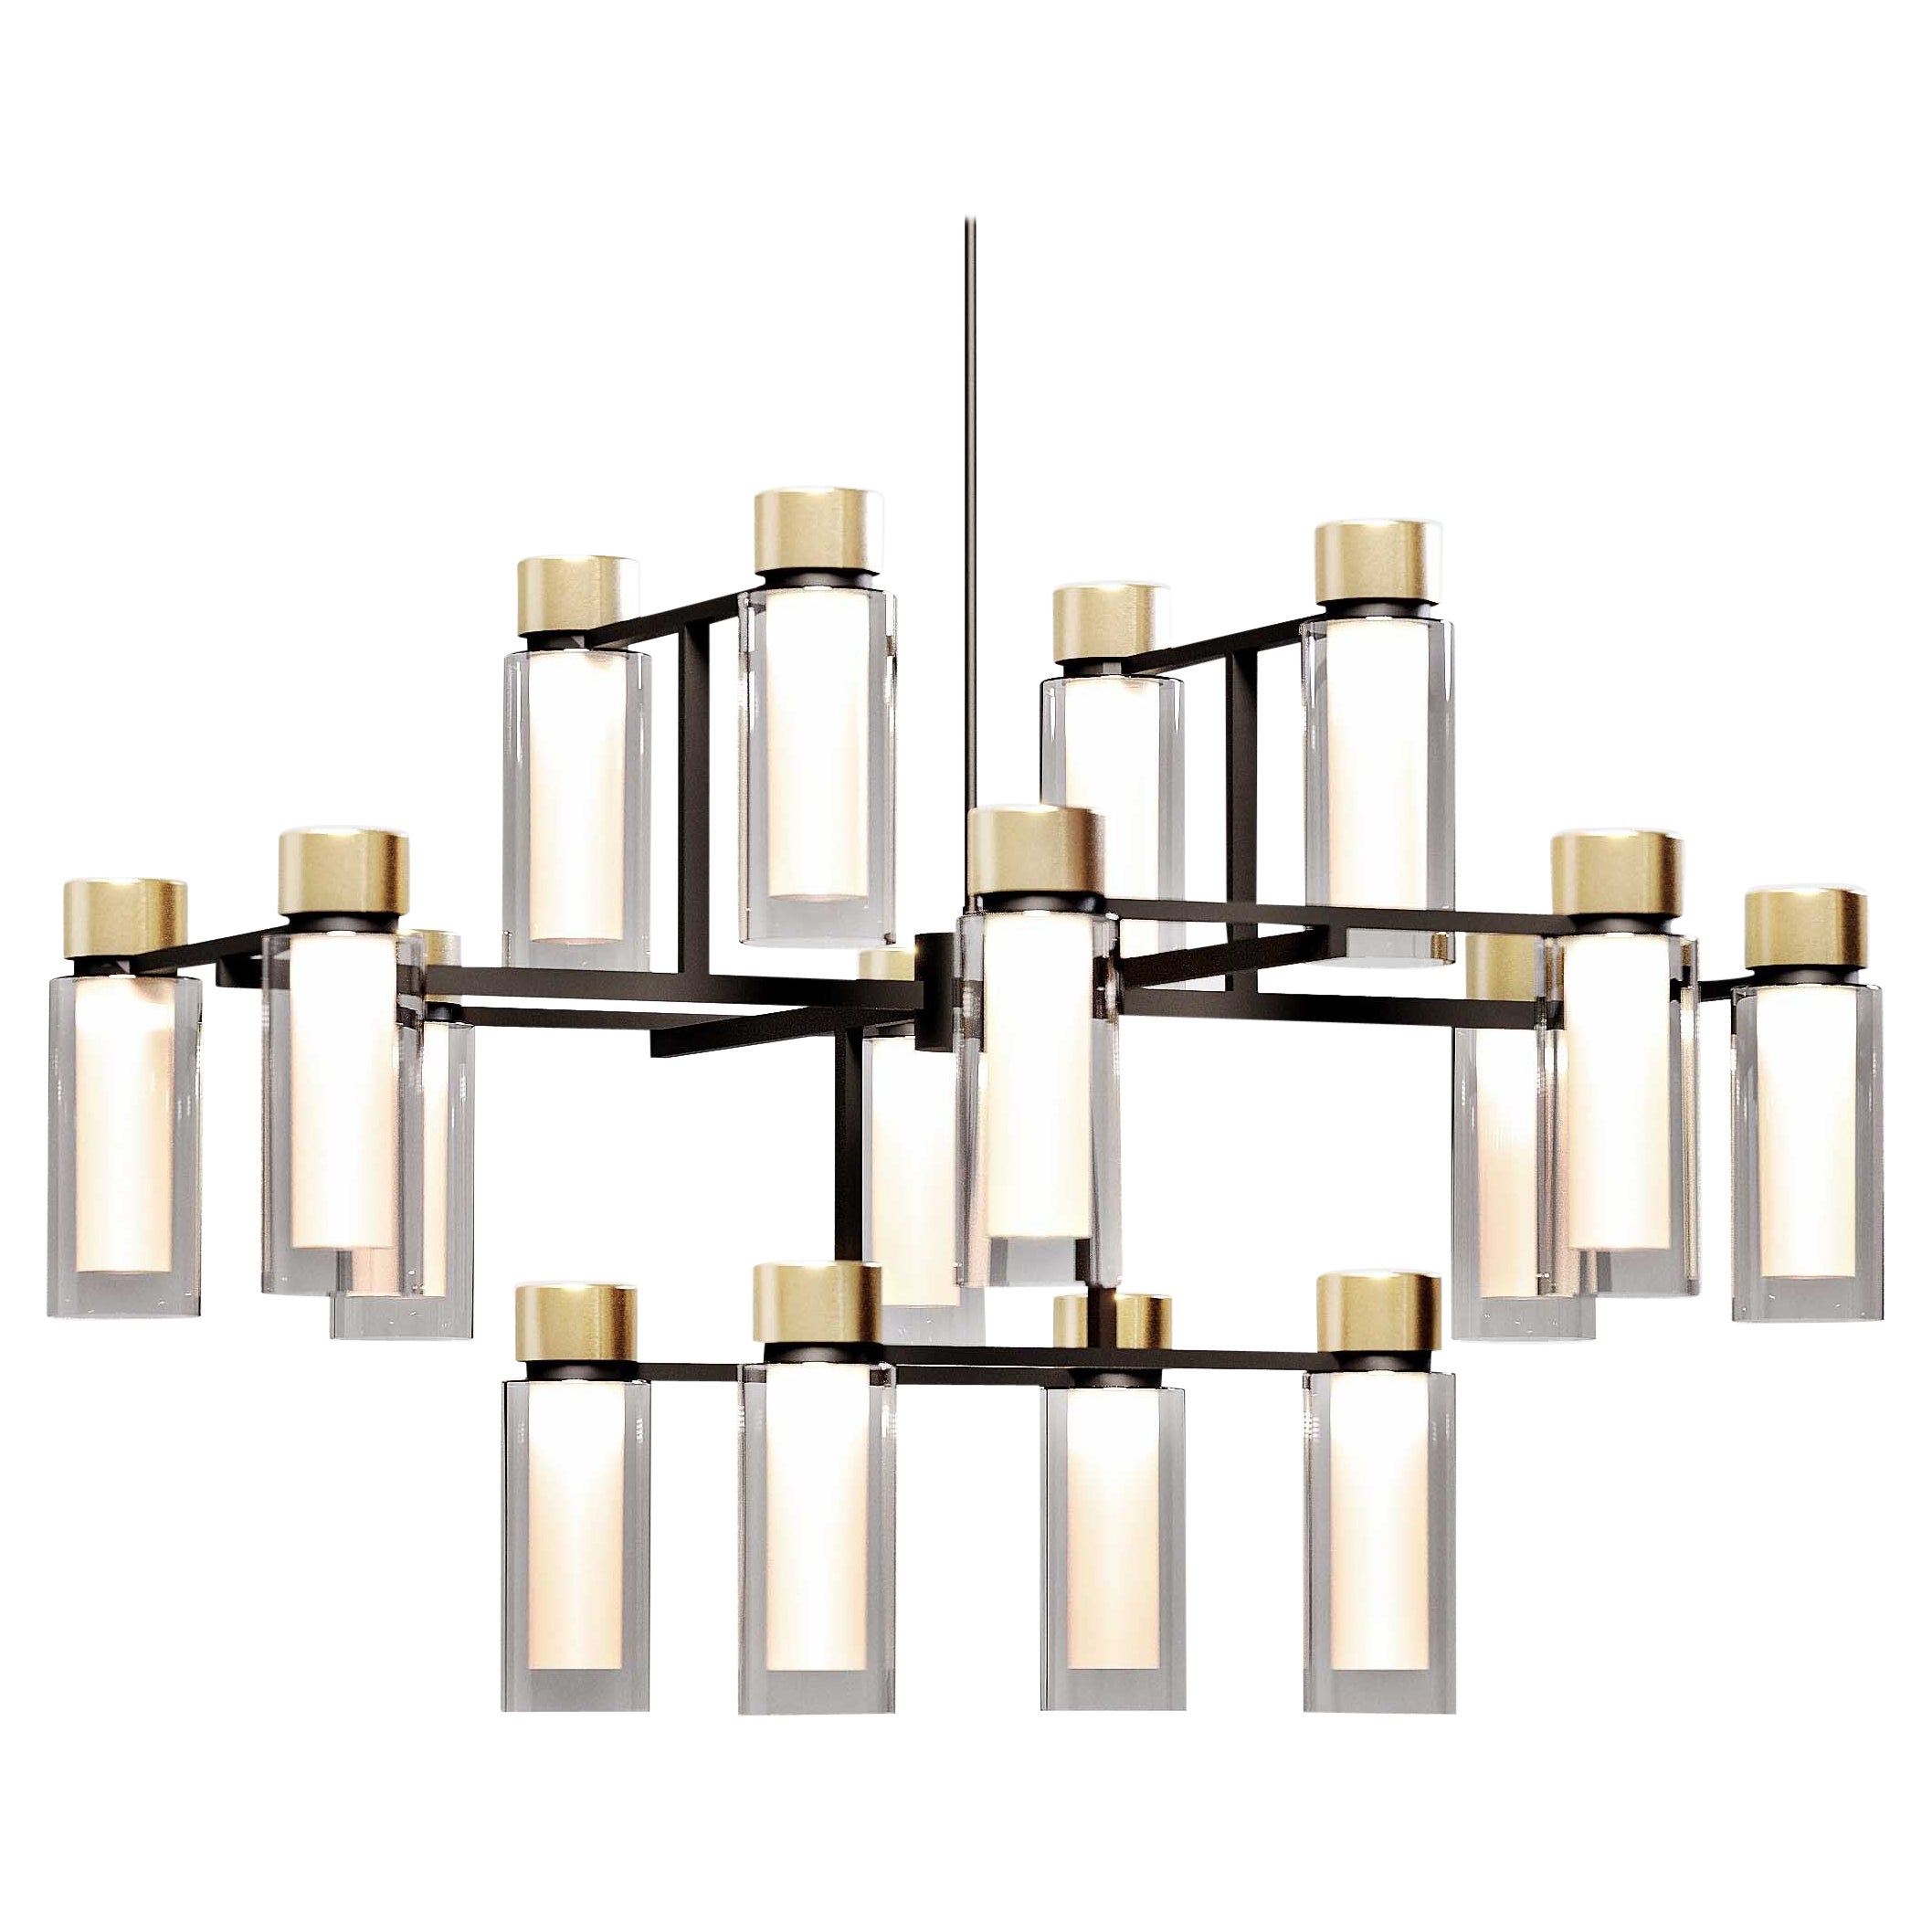 Contemporary Chandelier 'Osman 560.16' by Tooy, Brushed Brass & Smoke Glass